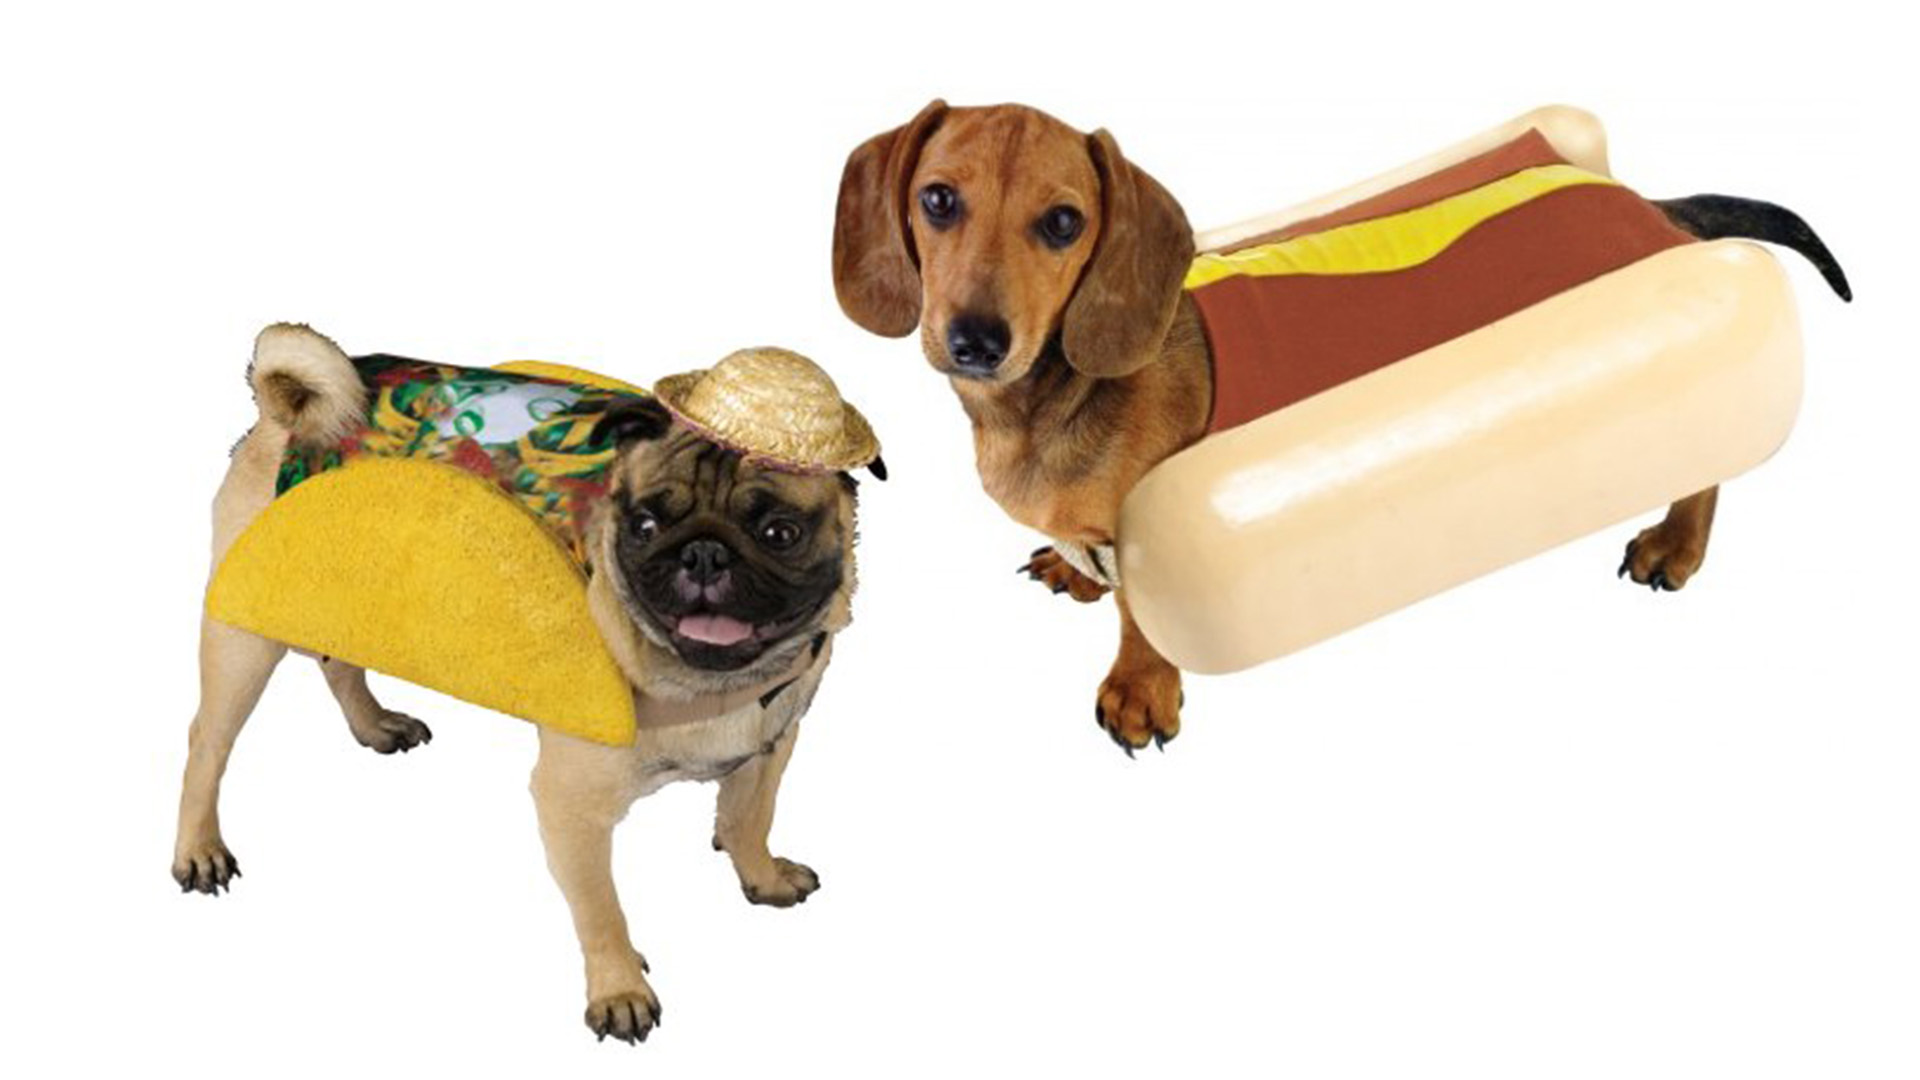 Cutest Halloween dog costumes inspired by food